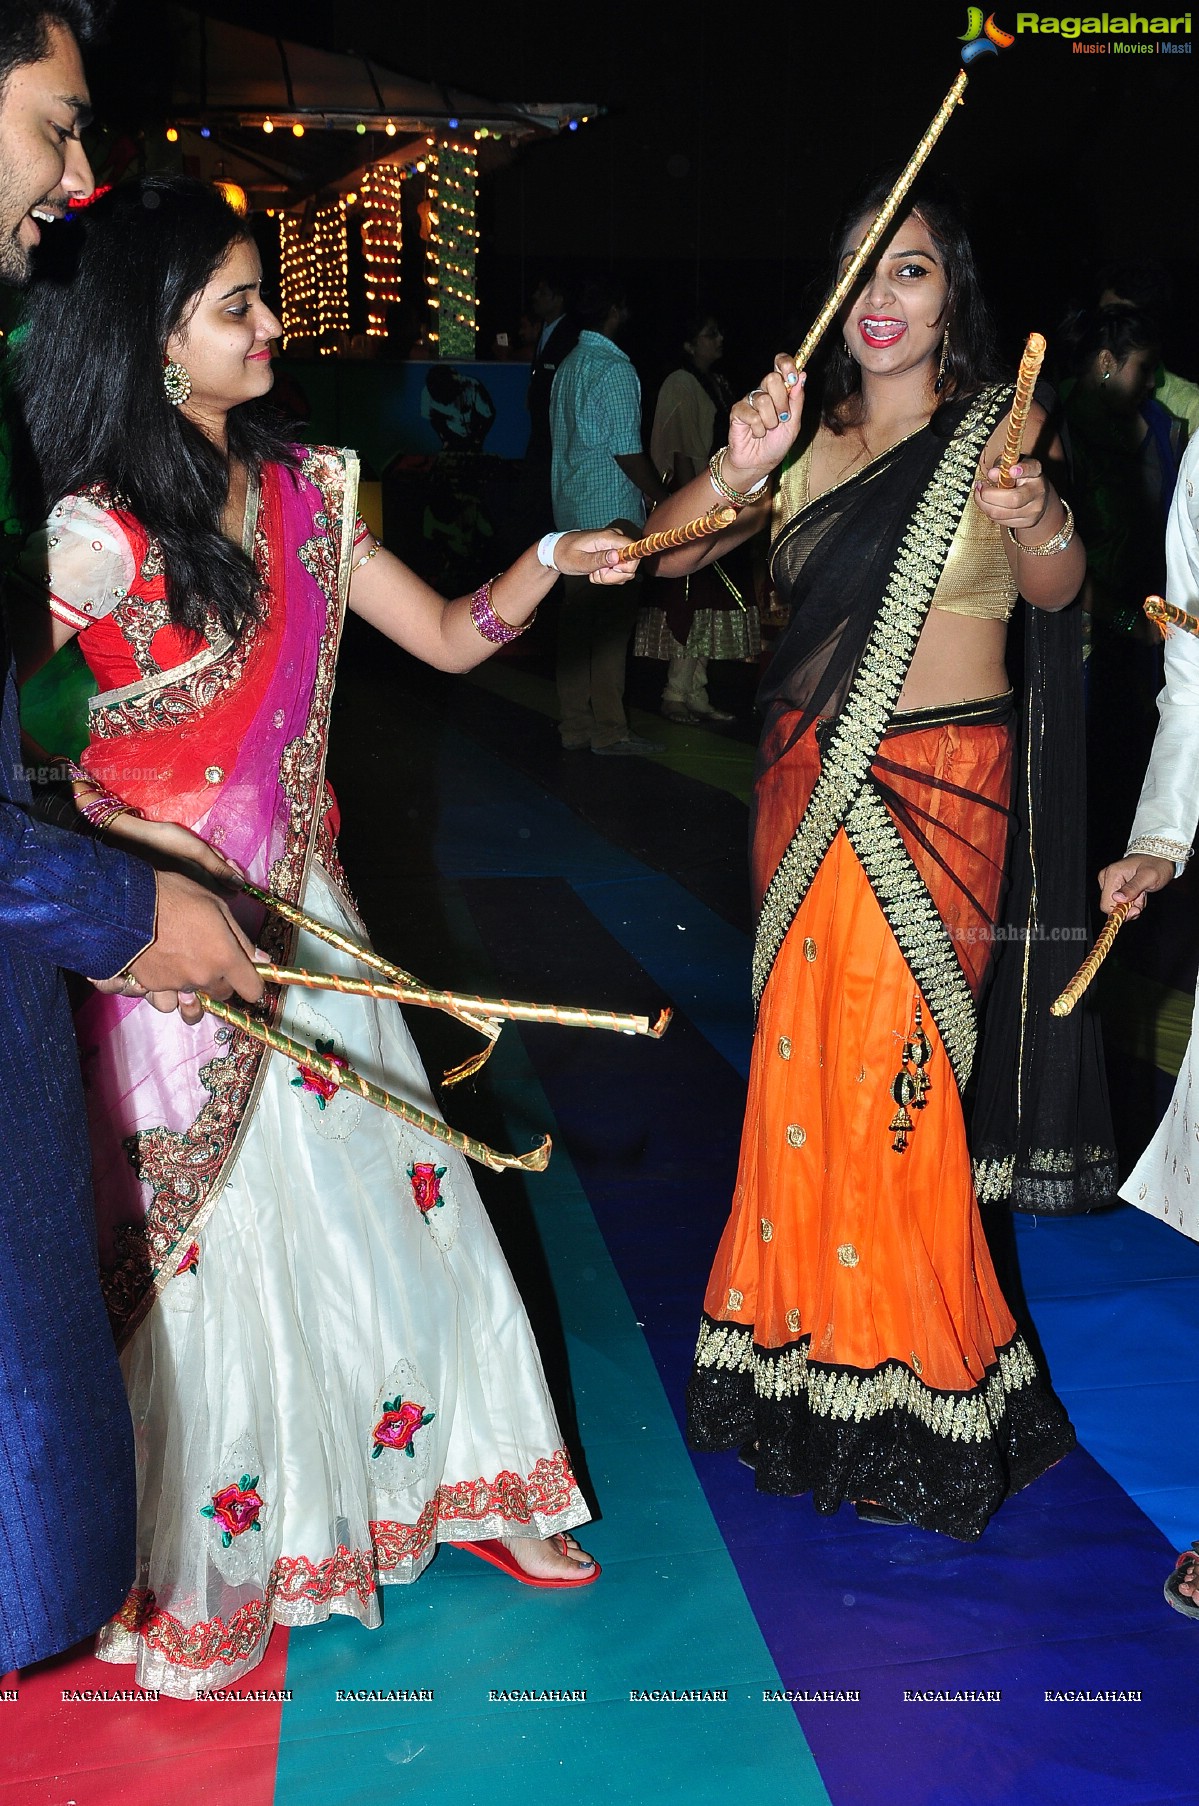 The Grand Dandiya Ball with Theme Fusion of Indian Culture & Pop Art at JRC Convention, Hyderabad